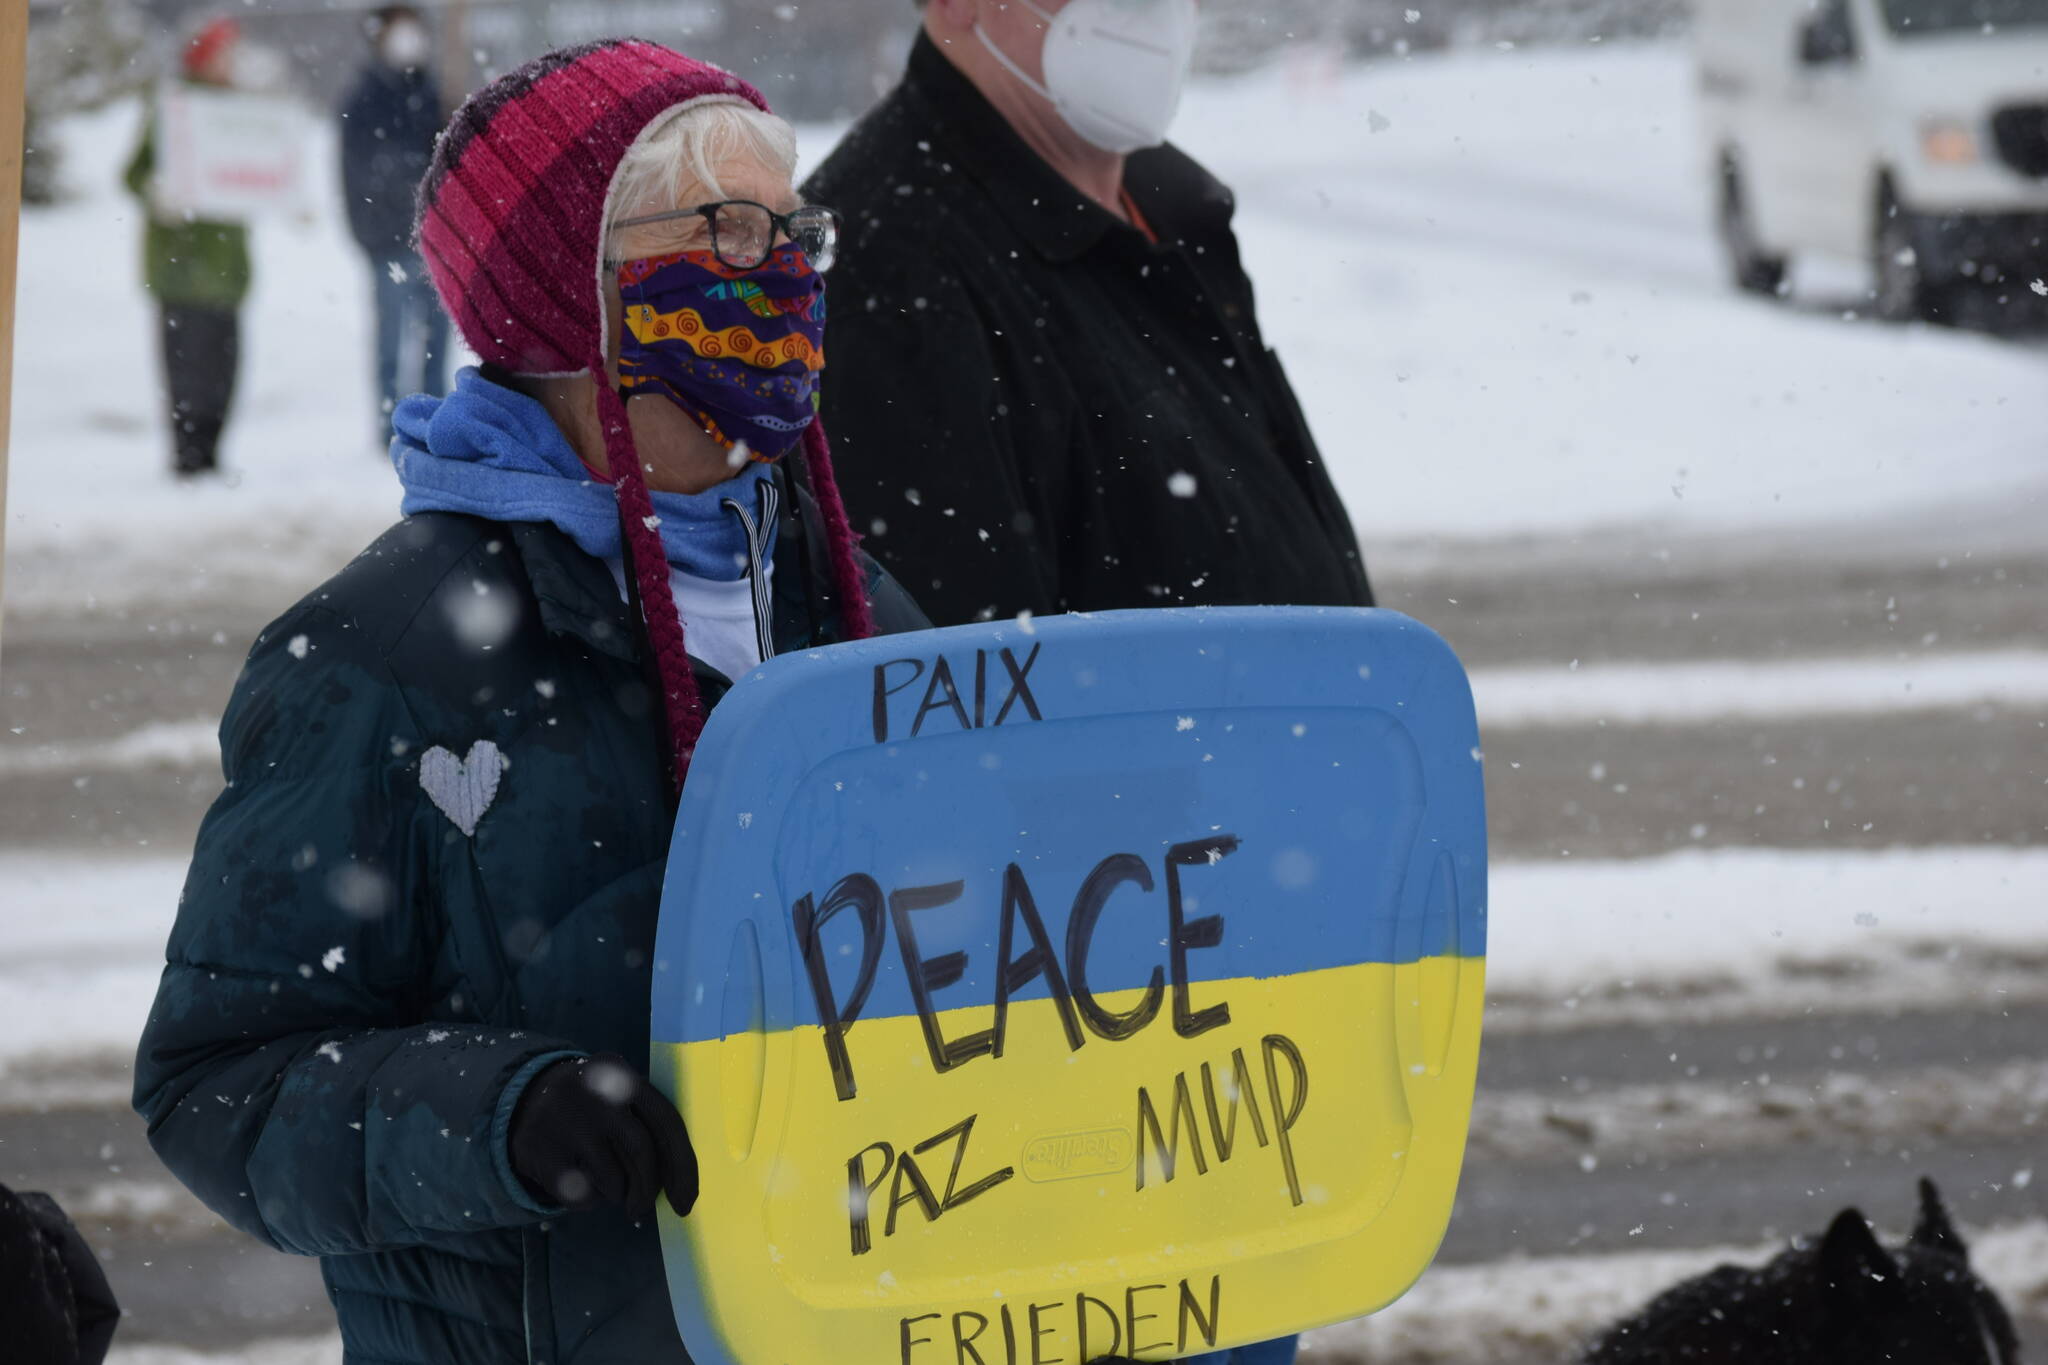 Susie Smalley demonstrates during the Many Voices Ukraine vigil on Saturday, March 5, 2022, in Soldotna, Alaska. (Camille Botello/Peninsula Clarion)